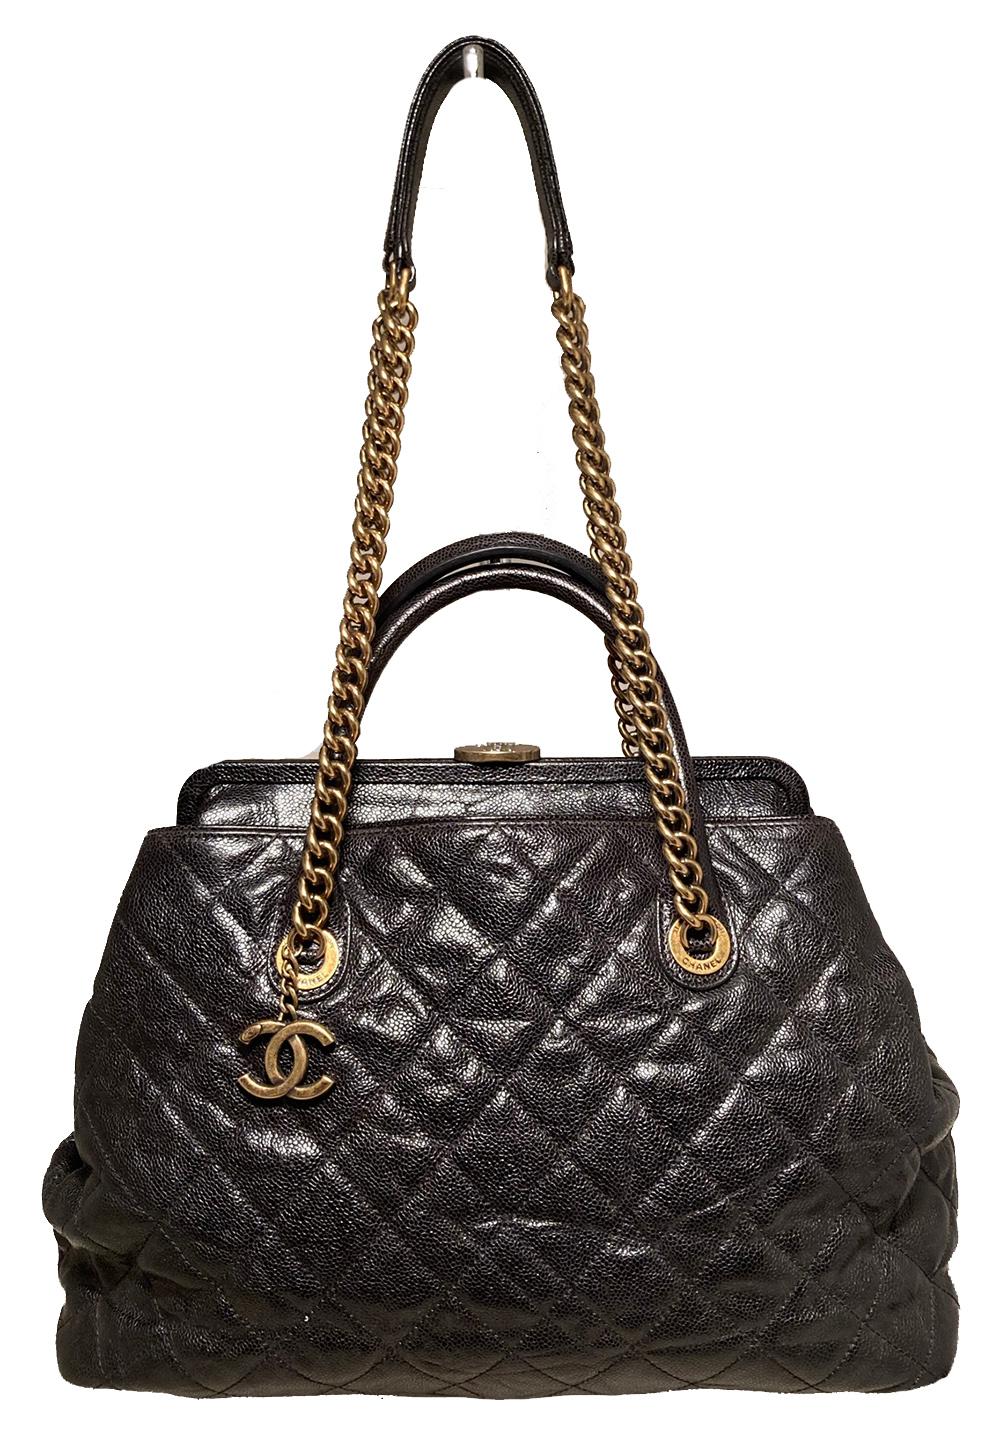 Women's Chanel Glazed Caviar Large Frame Tote Bag For Sale